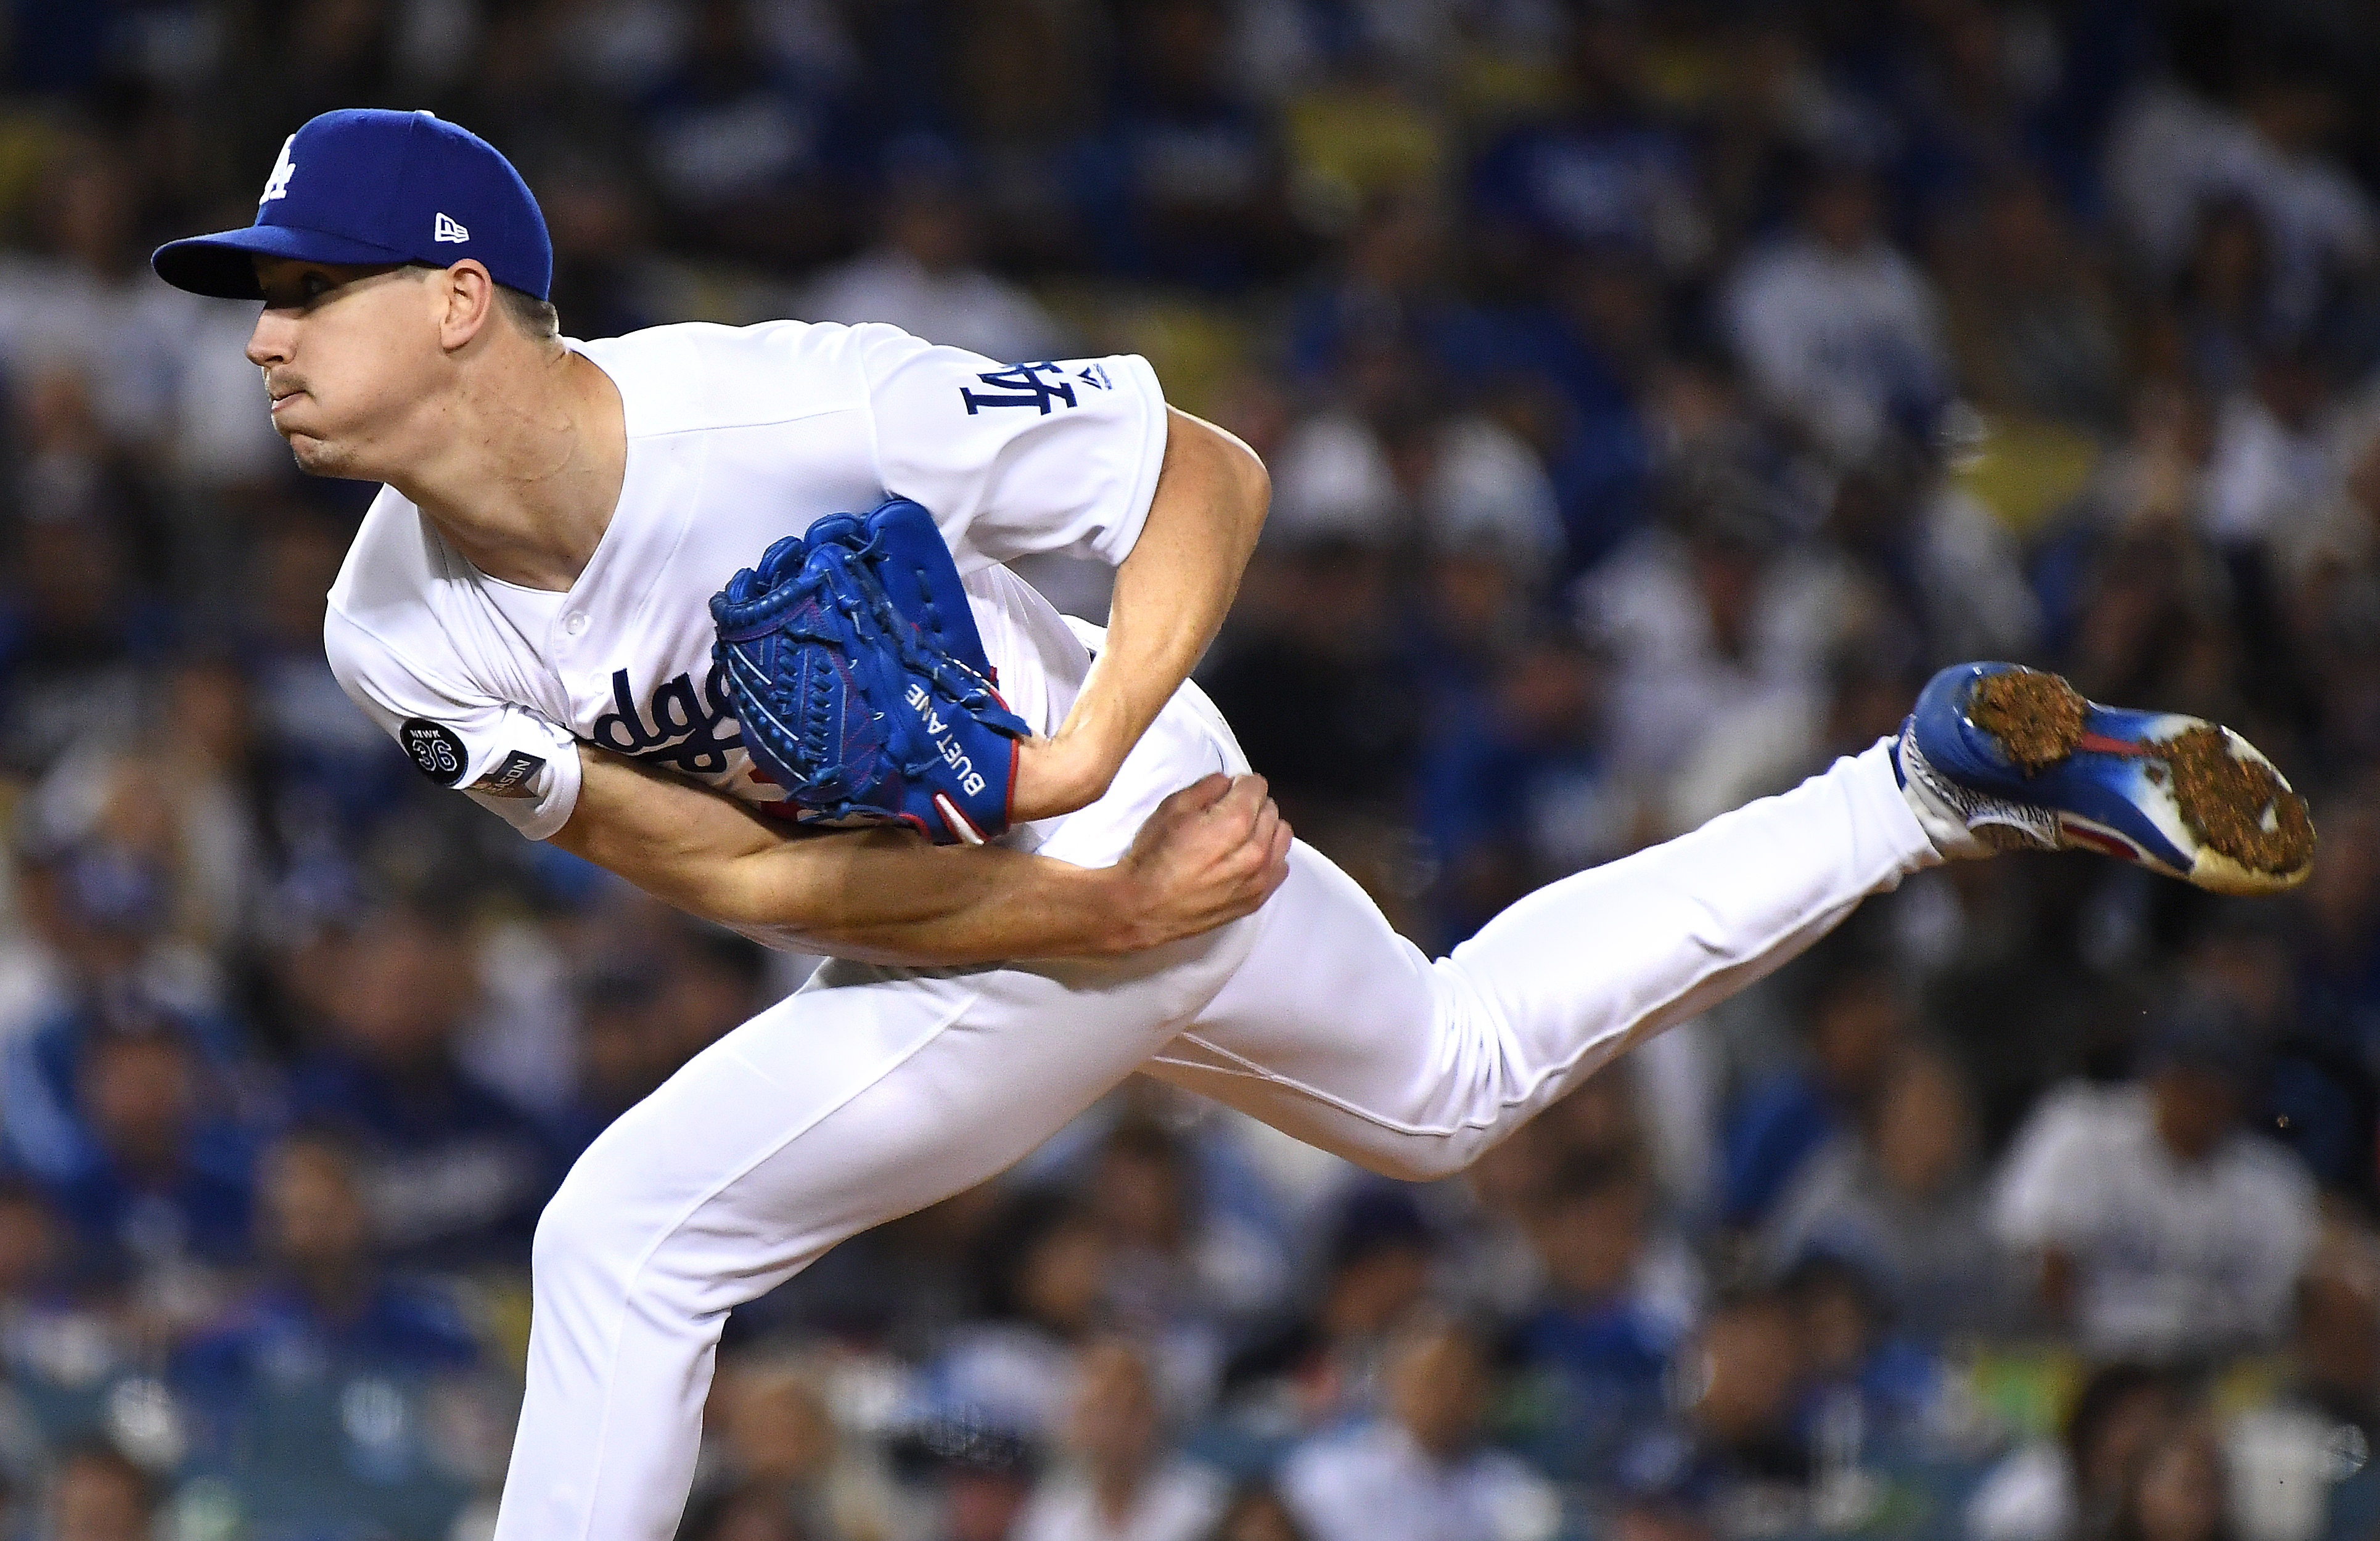 Could Joc Pederson become NL's first rookie Gold Glove outfielder?, by  Cary Osborne